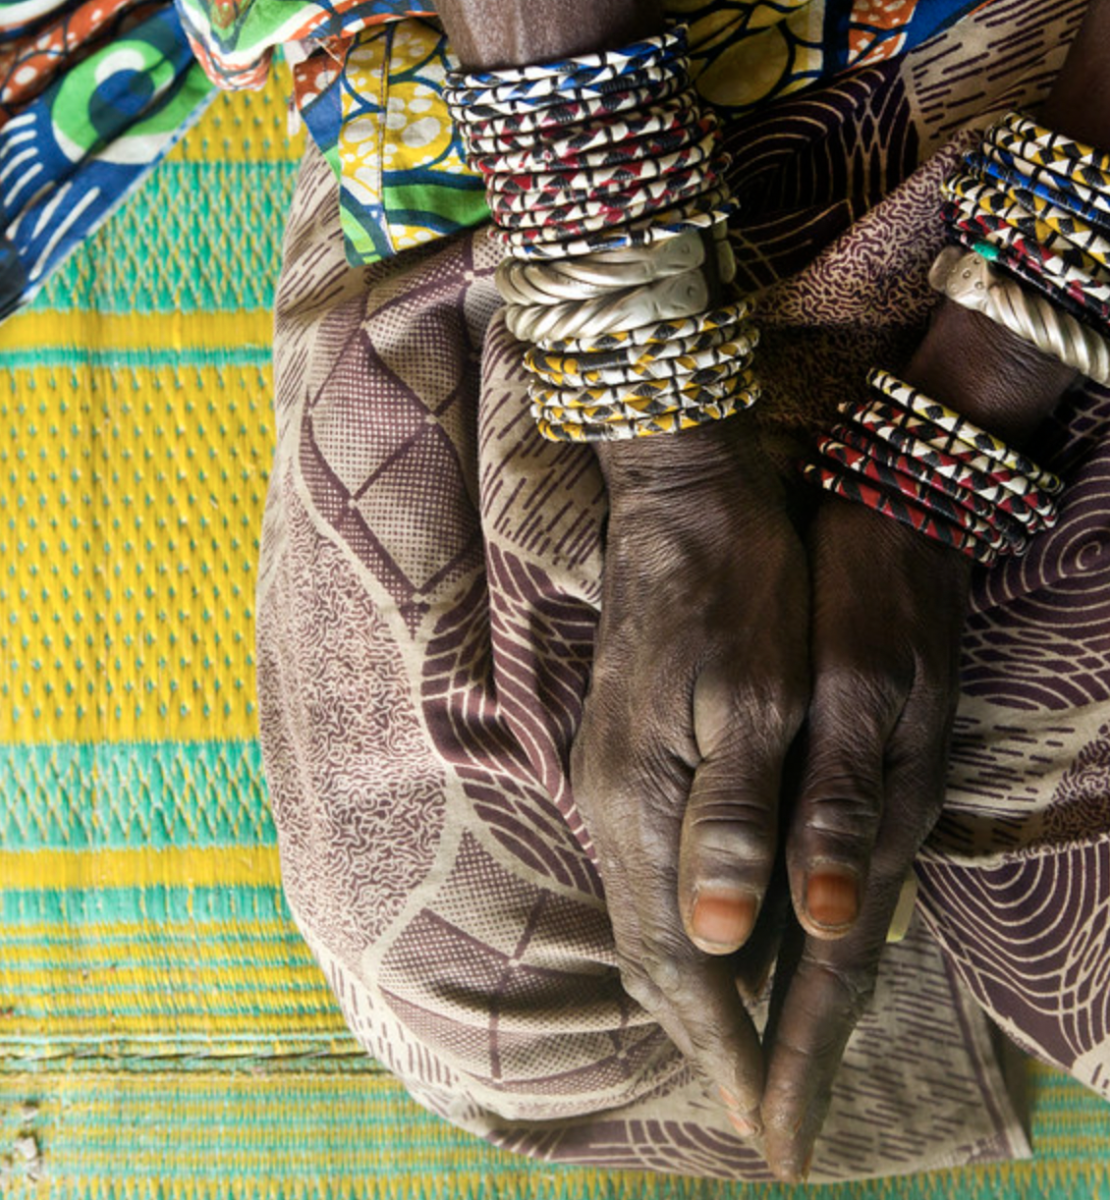 A woman's hands, with several bracelets, rest on her knees on top of a bright colored cloth.